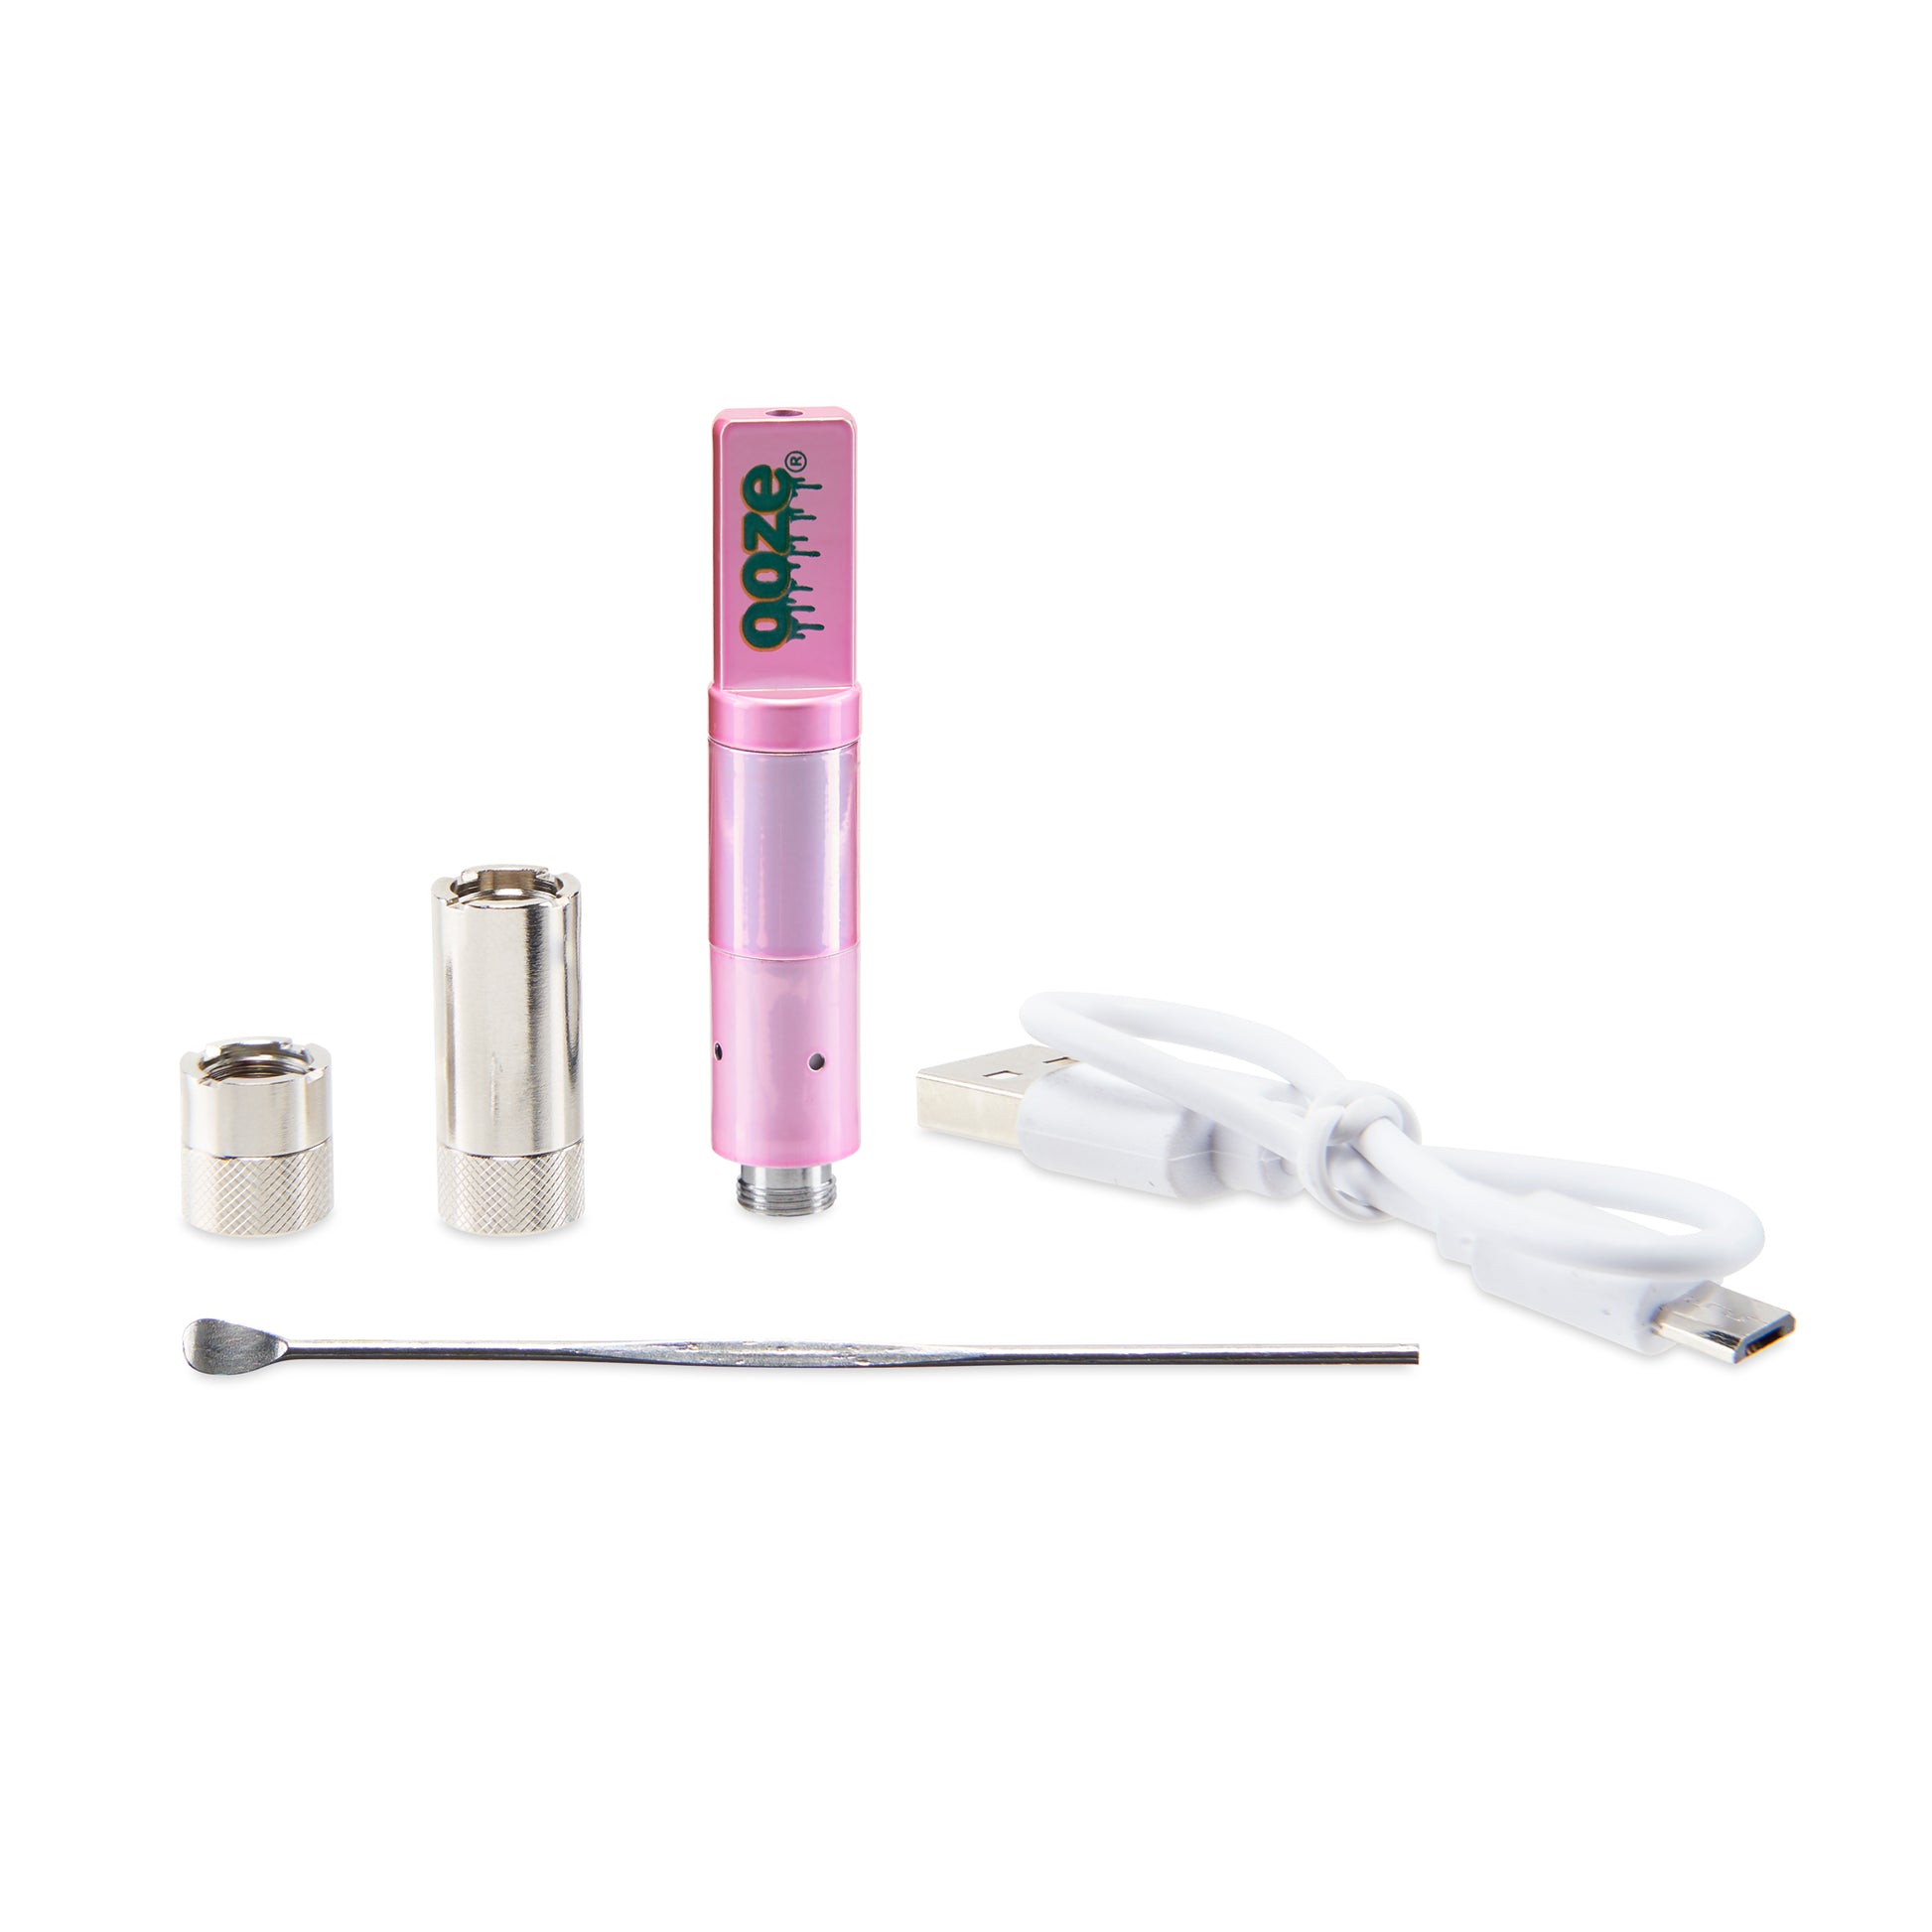 The Ice Pink Ooze Duplex Pro Vaporizer's accessories are in a neat line. the 0.5g adapter and 1ml adapter are next to the pink wax atomizer, which is next to the white type-c charger. The dab tool lies in the front of the group.